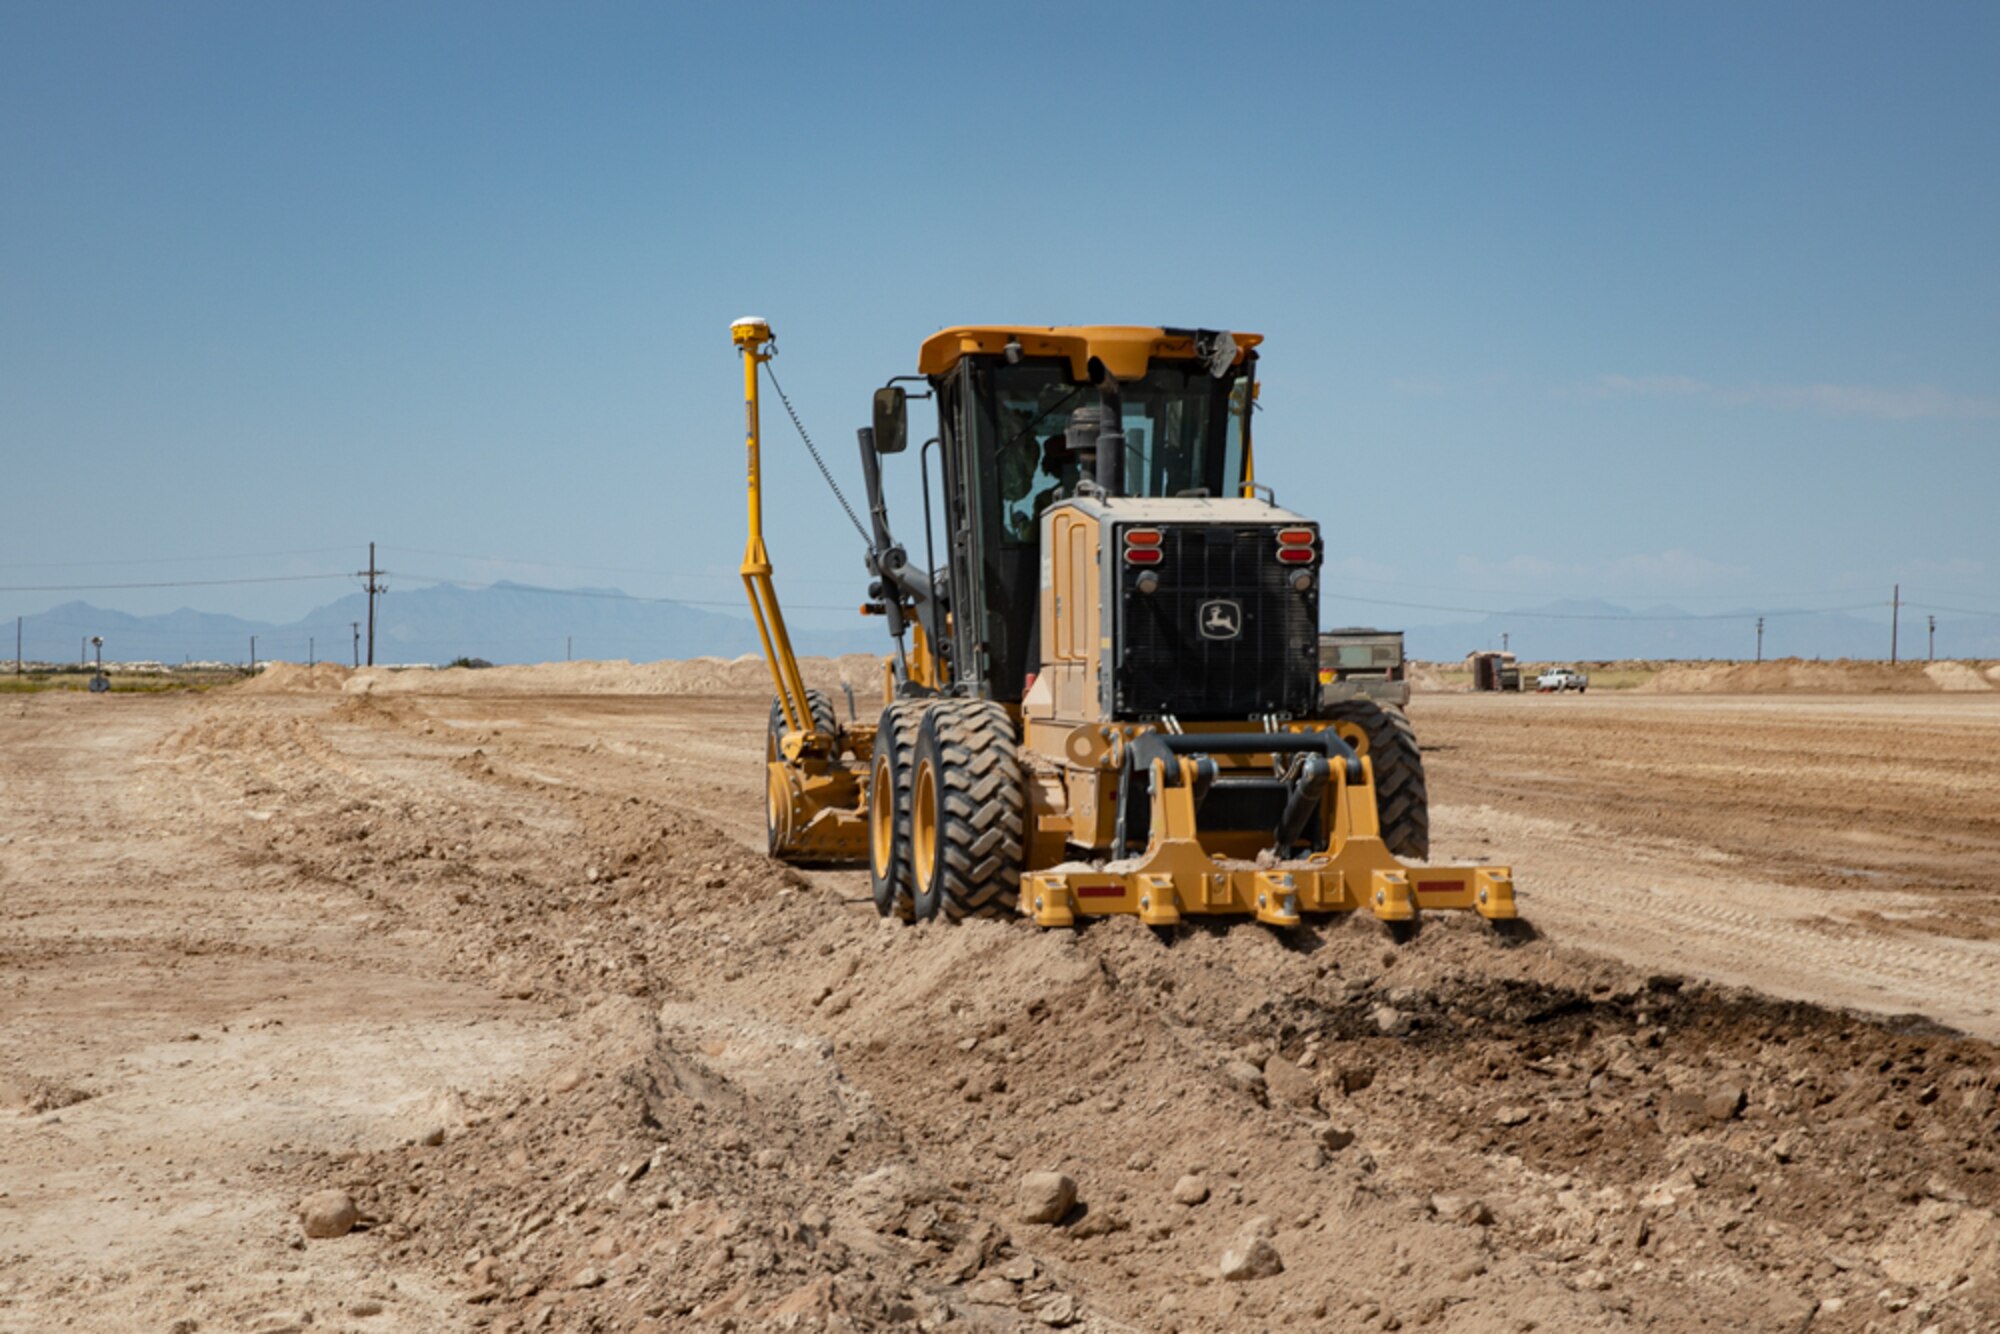 An Airman with Task Force-Holloman deployed from the 820th RED HORSE Squadron at Nellis Air Force Base, Nevada, clears an area of land for future construction as part of Operation Allies Welcome Sept. 16, 2021 on Holloman Air Force Base, New Mexico. The Department of Defense, through the U.S. Northern Command, and in support of the Department of State and Department of Homeland Security, is providing transportation, temporary housing, medical screening, and general support for at least 50,000 Afghan evacuees at suitable facilities, in permanent or temporary structures, as quickly as possible. This initiative provides Afghan evacuees essential support at secure locations outside Afghanistan. (U.S. Army photo by Spc. Nicholas Goodman)